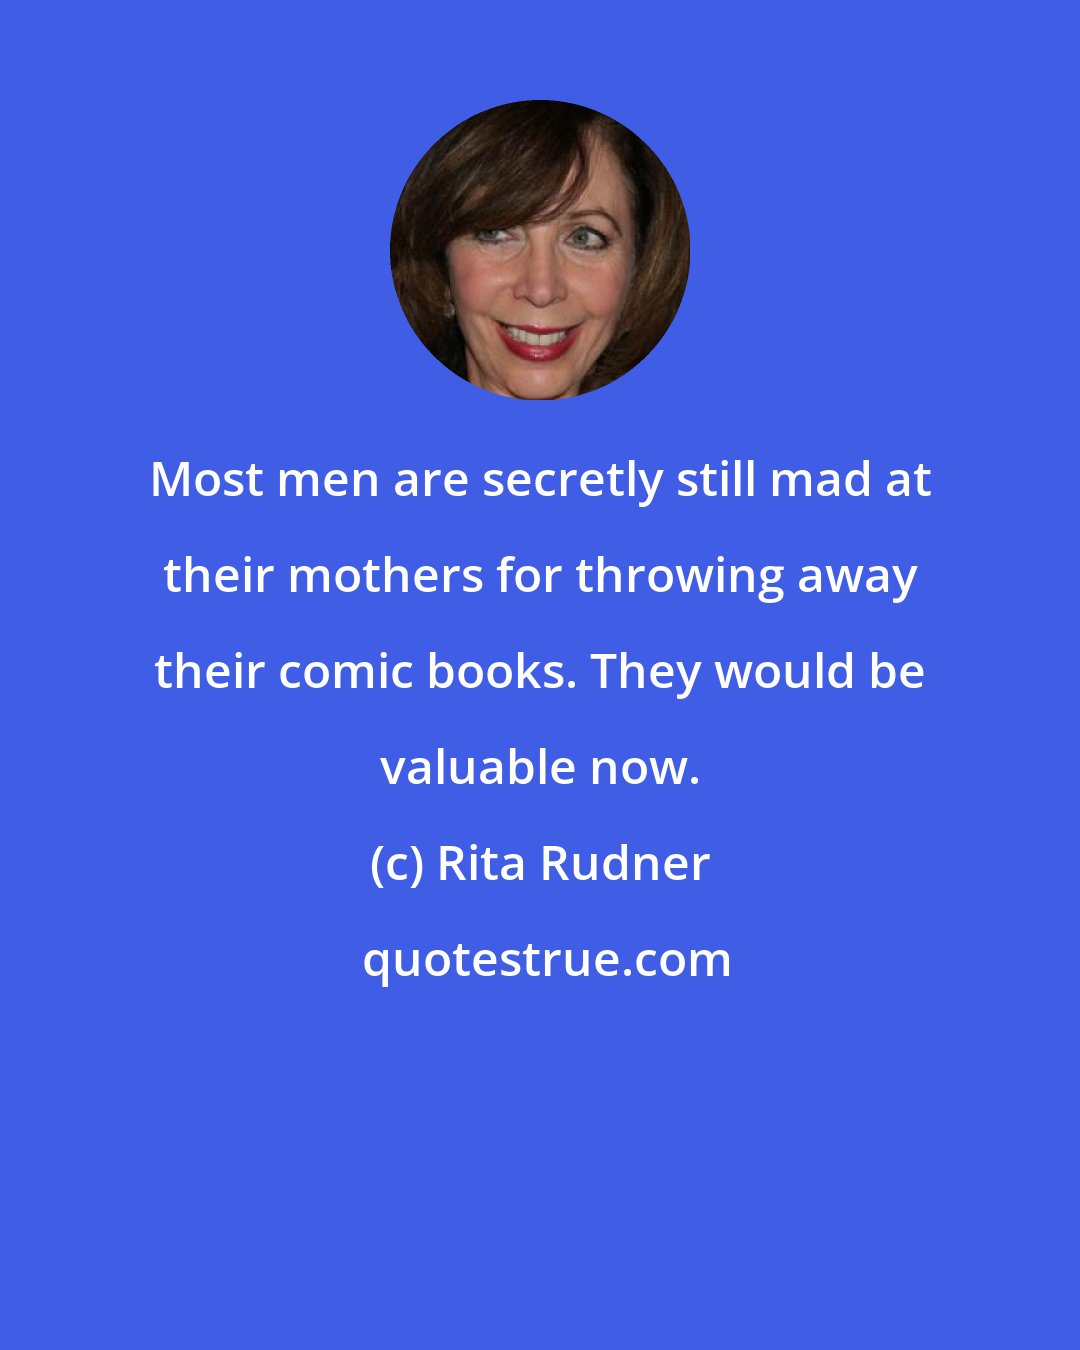 Rita Rudner: Most men are secretly still mad at their mothers for throwing away their comic books. They would be valuable now.